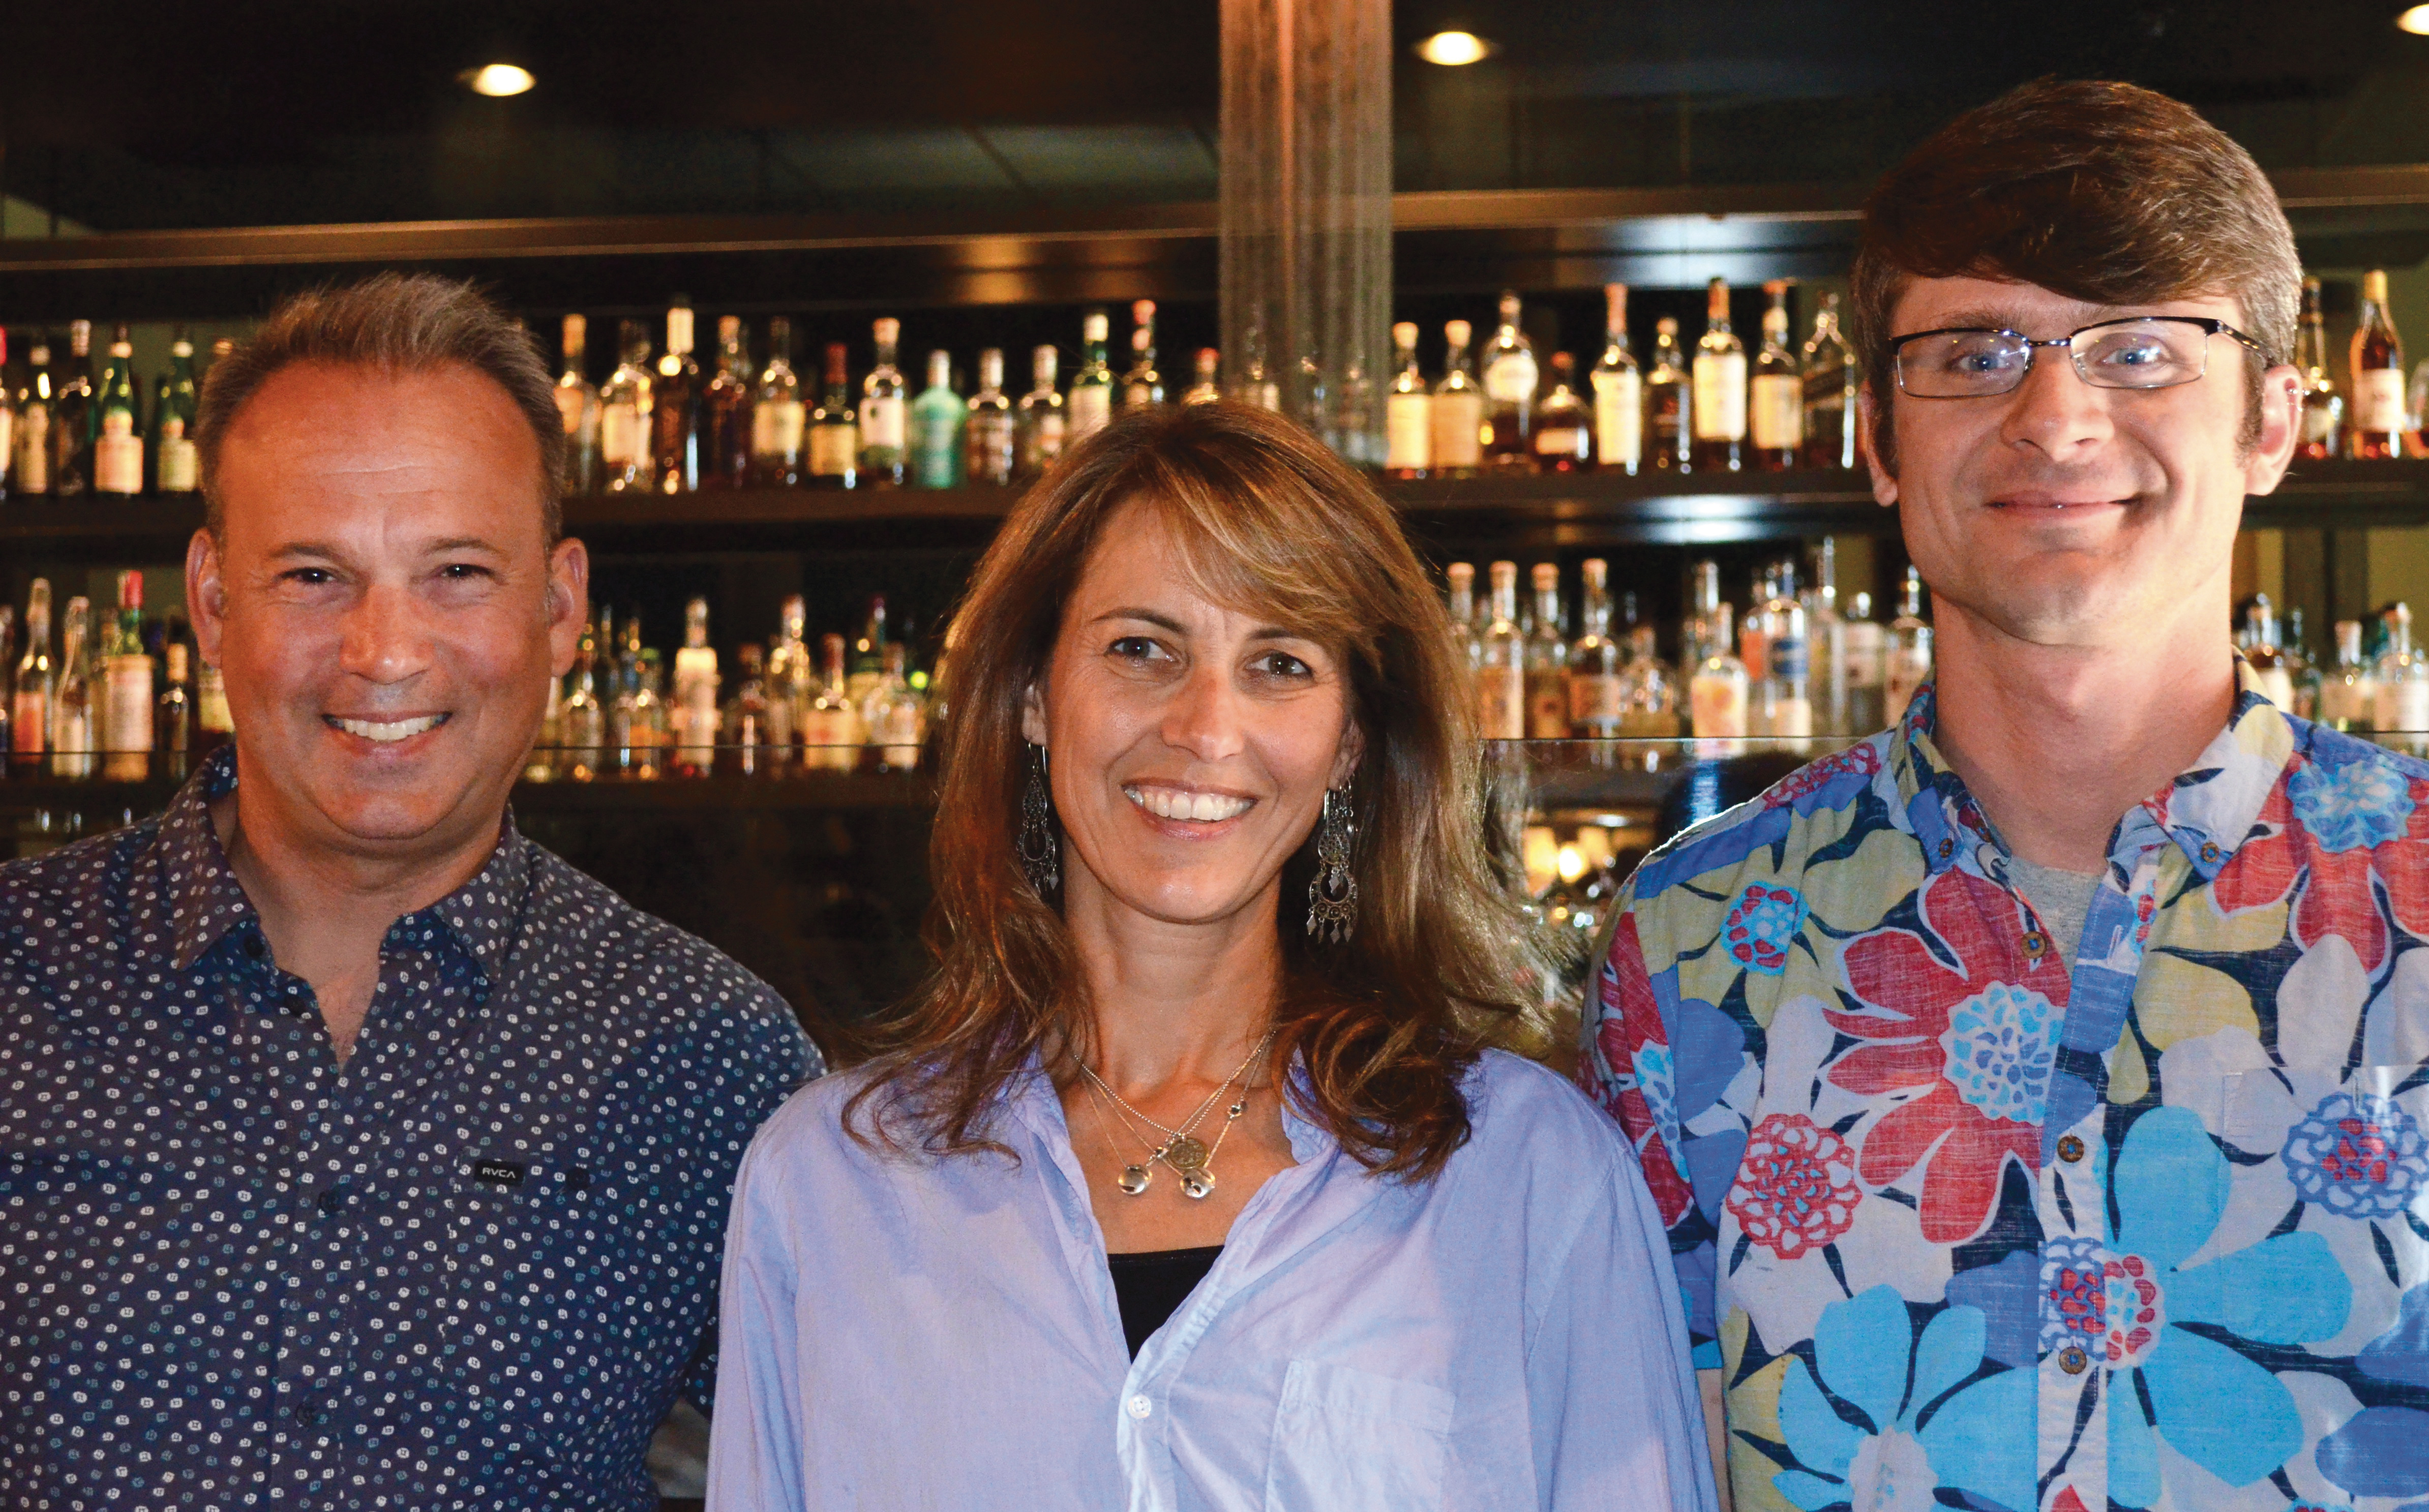 Owners Stewart and Carolyn Putney, and mixologist Brian Matulis of Timber & Salt in Redwood City.